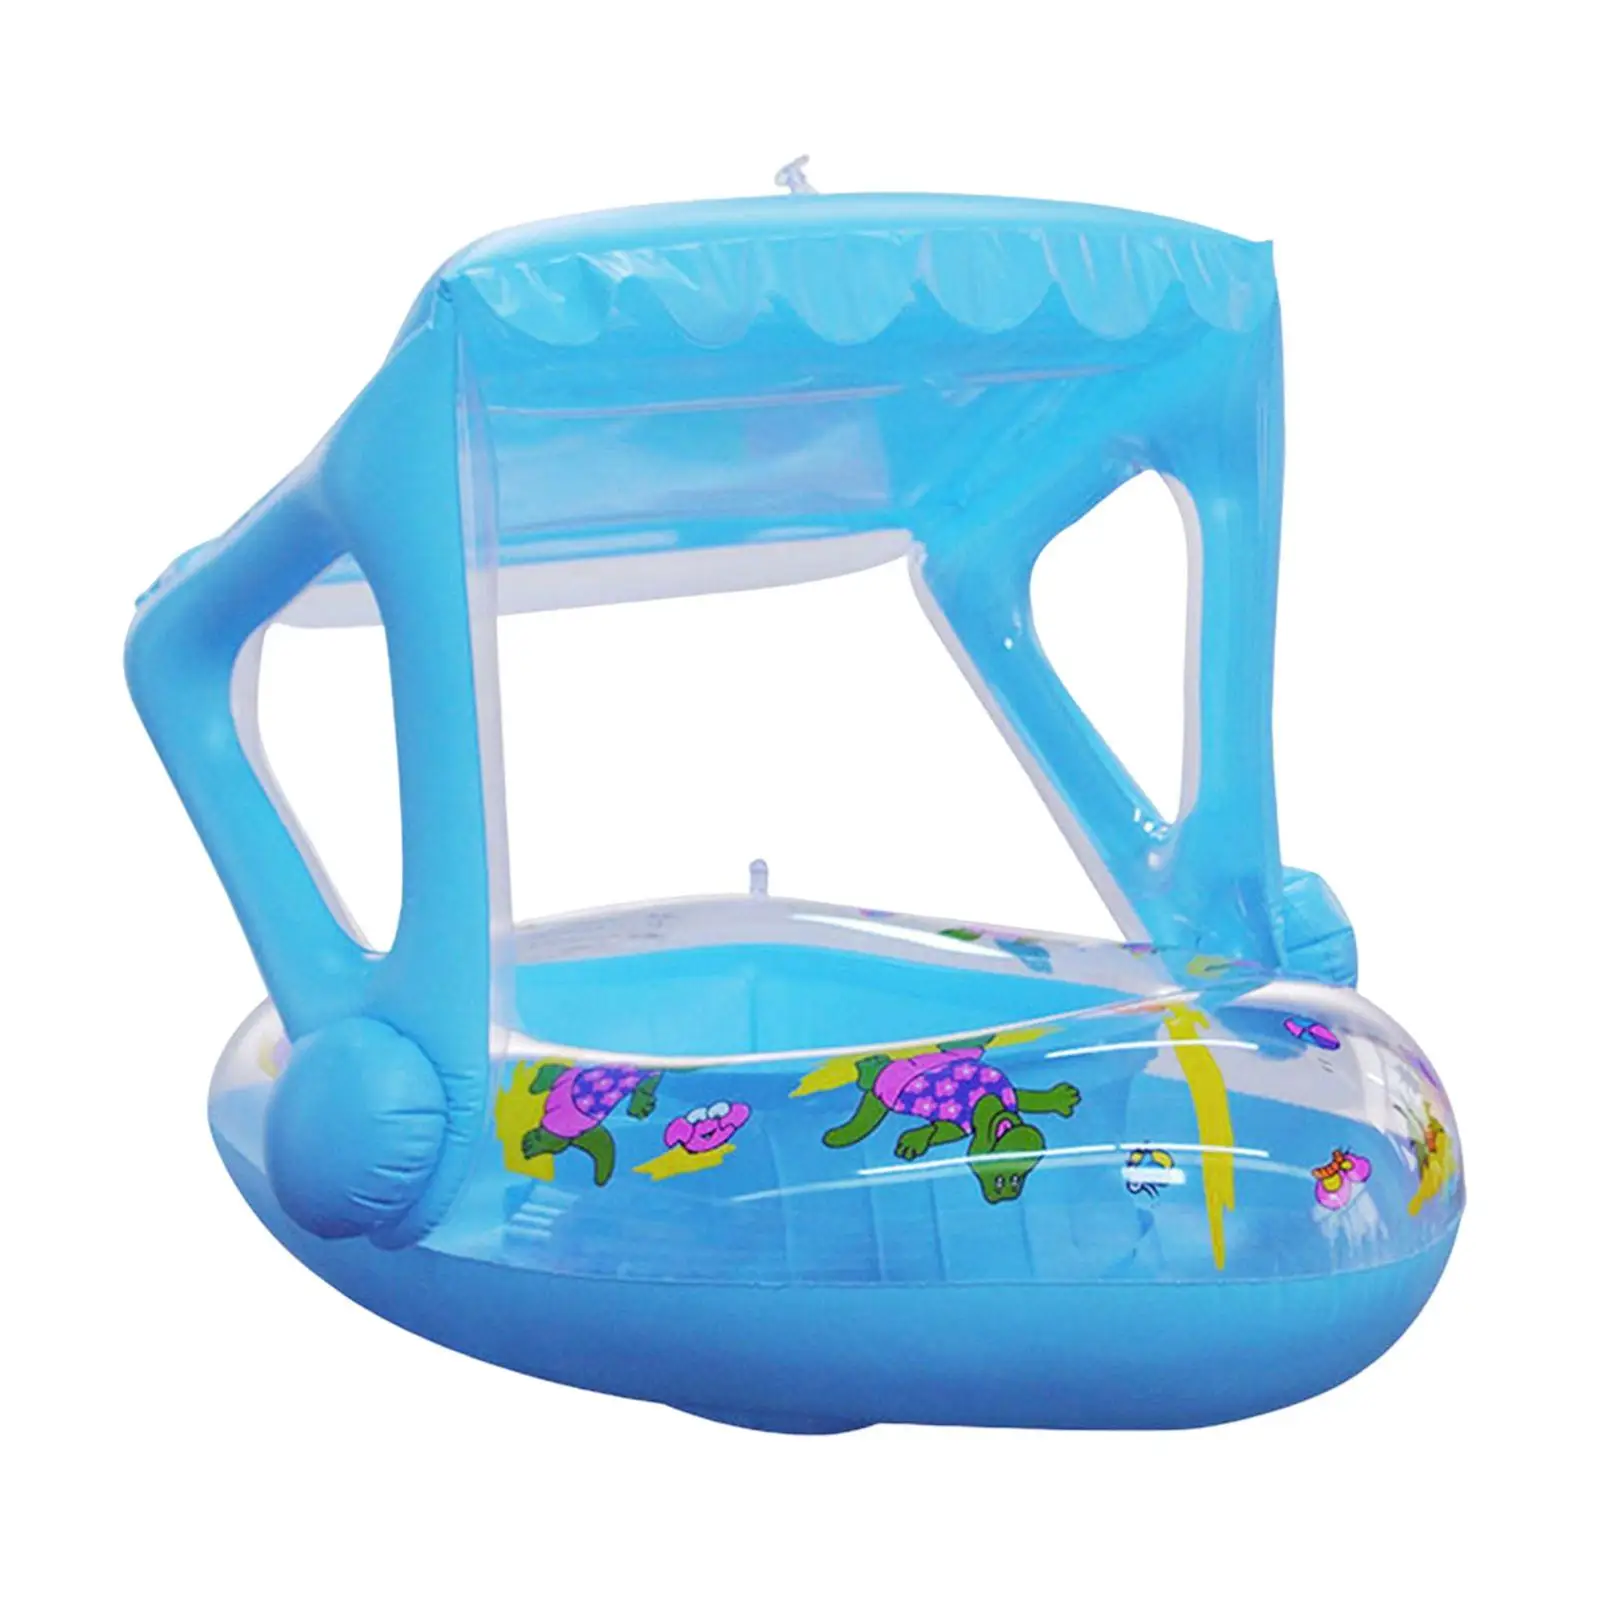 Float Rings with Canopy Bathtub Toys Summer Pool toy for boys girls